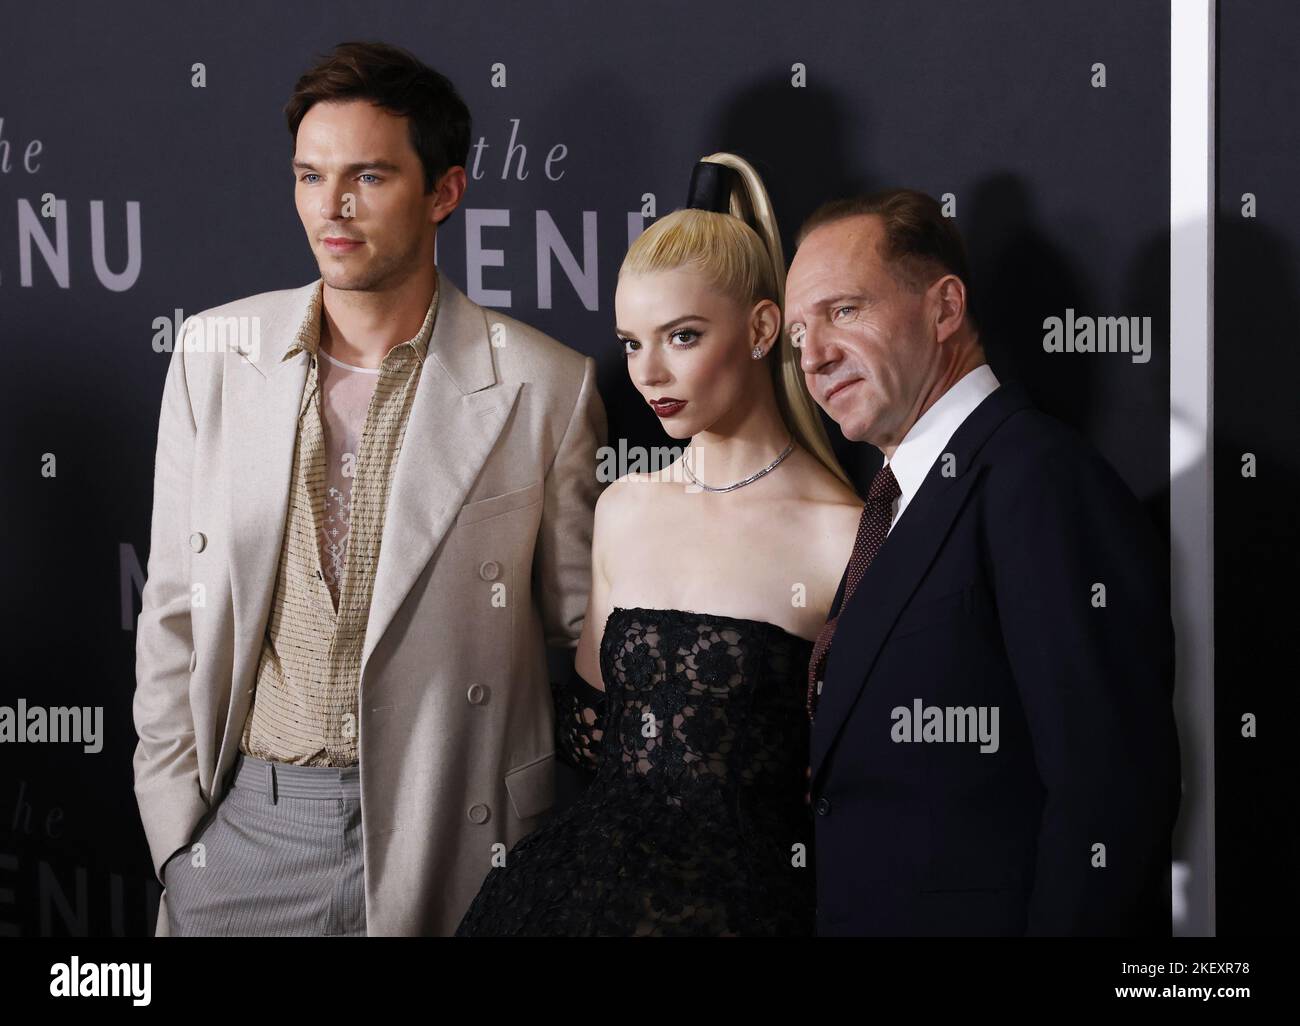 https://c8.alamy.com/comp/2KEXR78/new-york-united-states-14th-nov-2022-nicholas-hoult-anya-taylor-joy-and-ralph-fiennes-arrive-on-the-red-carpet-at-the-menu-new-york-premiere-at-amc-lincoln-square-theater-on-monday-november-14-2022-in-new-york-city-photo-by-john-angelilloupi-credit-upialamy-live-news-2KEXR78.jpg